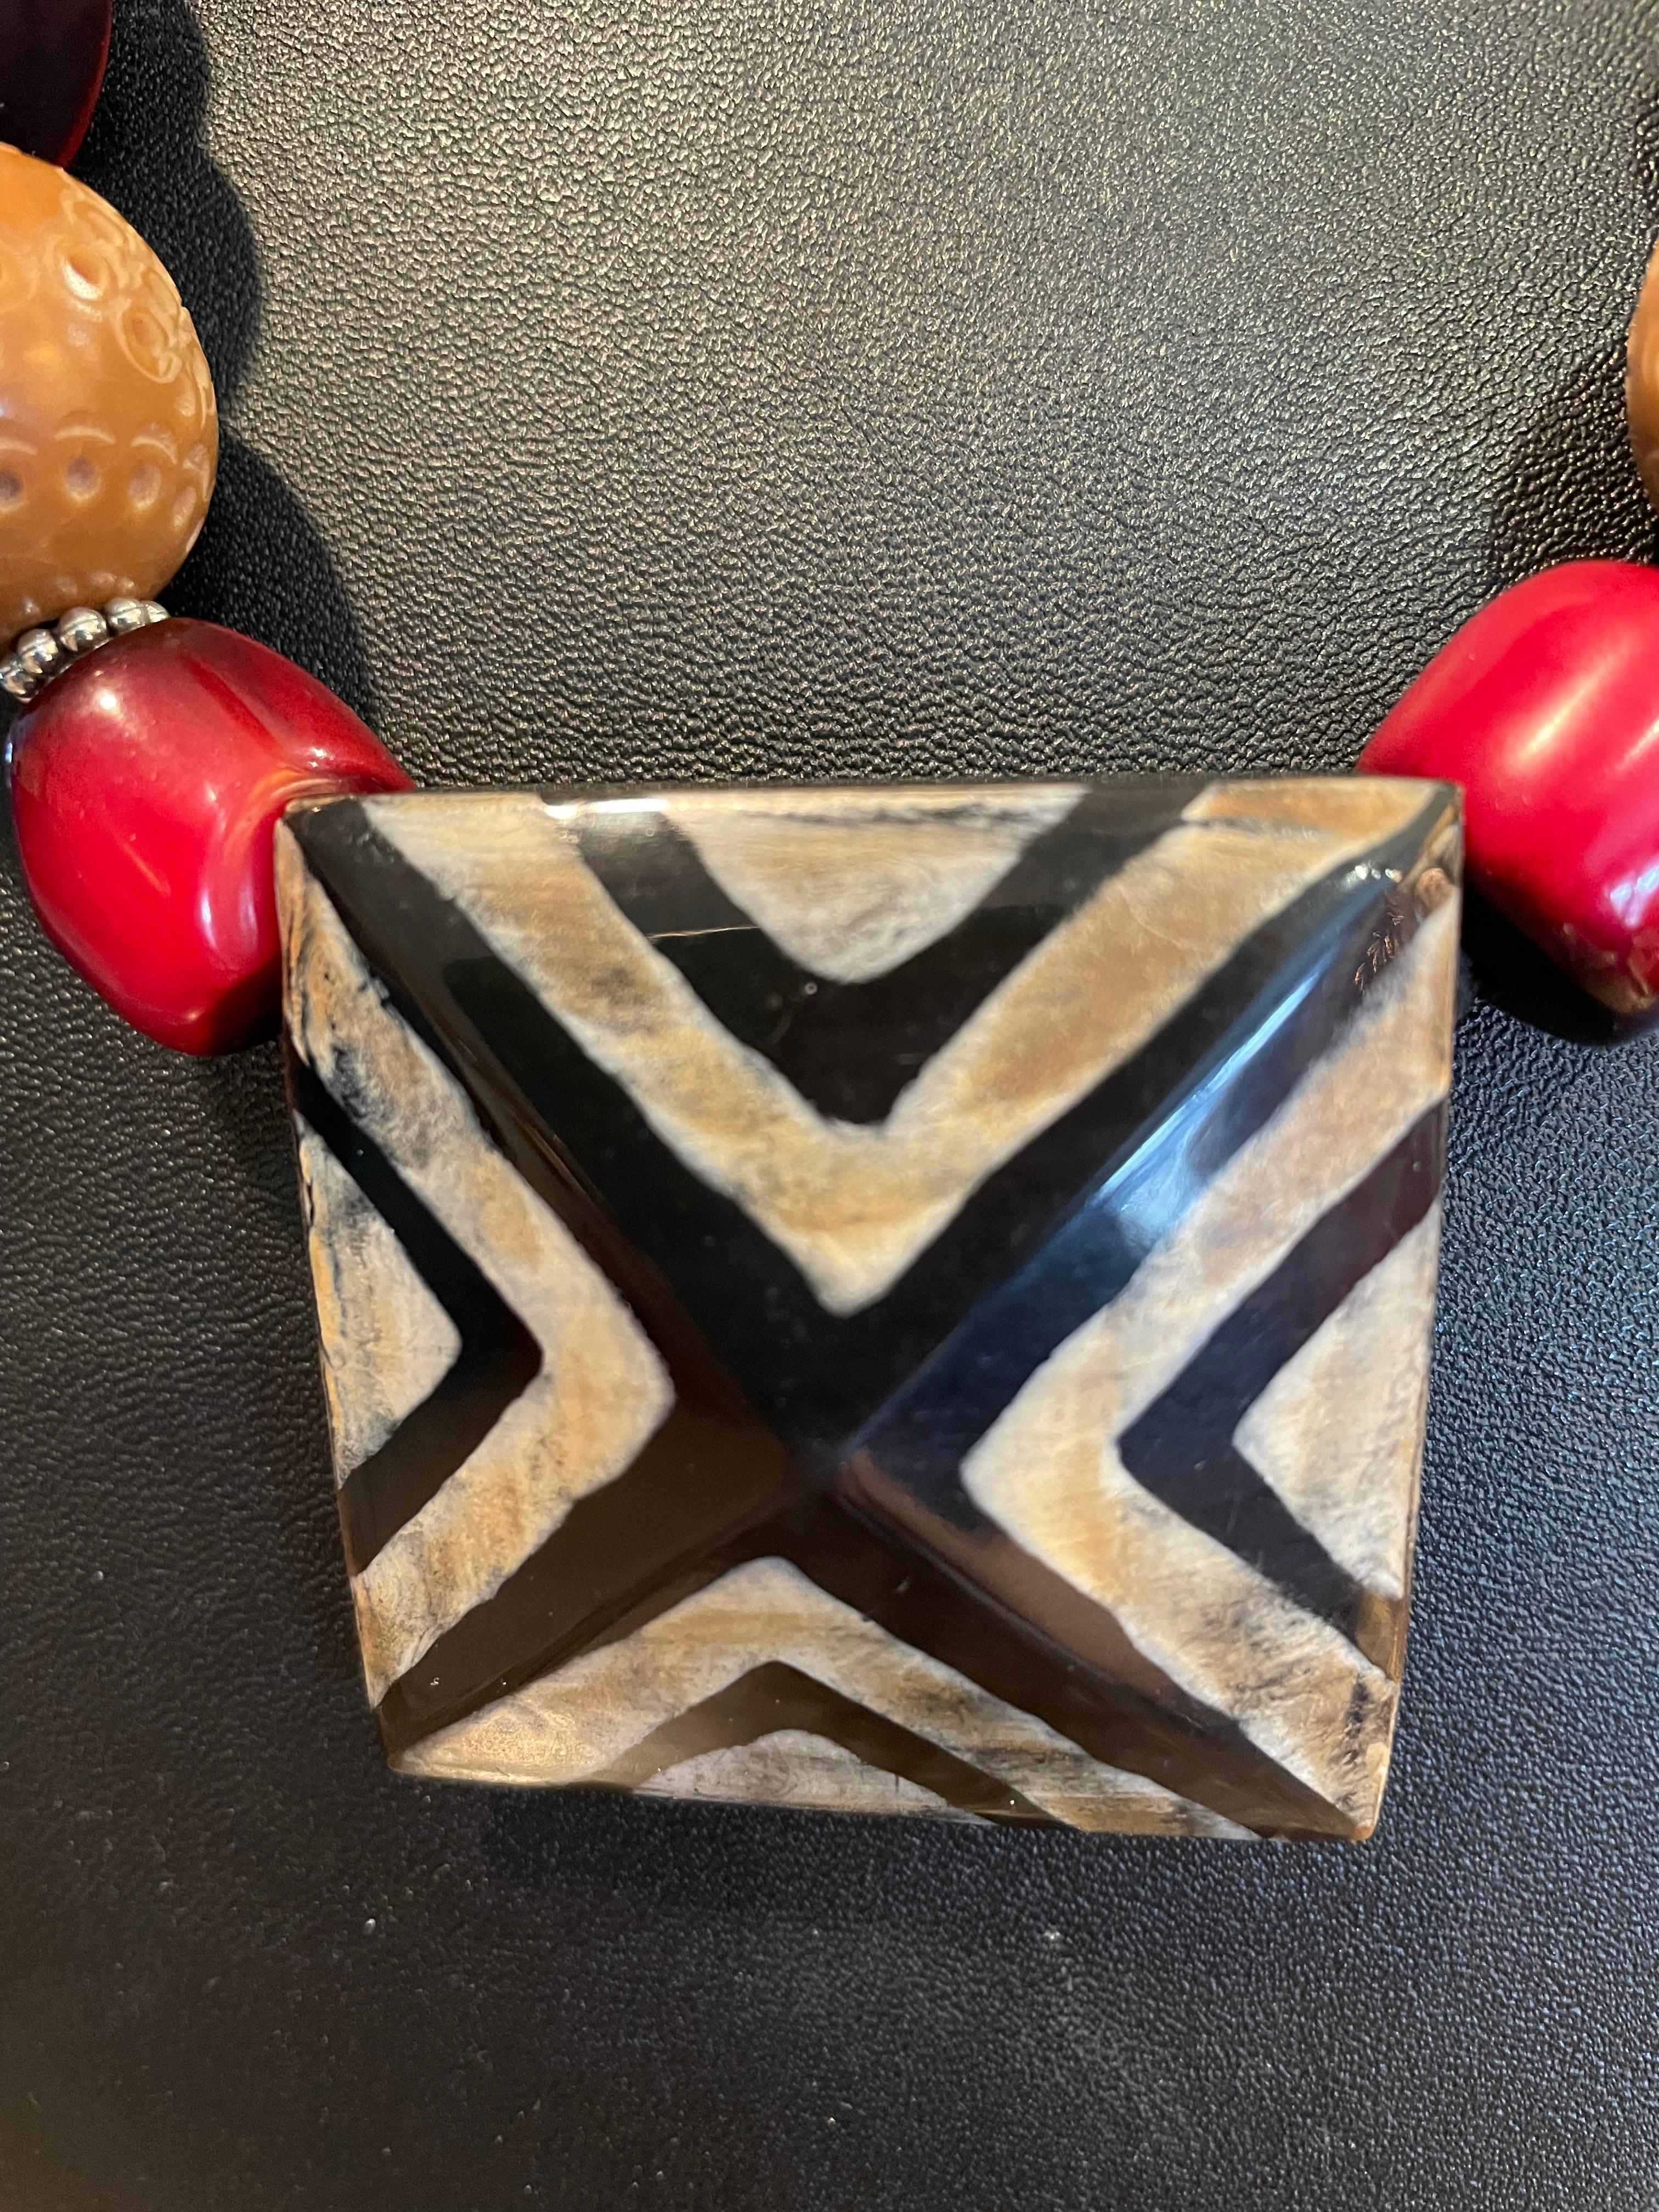 LB offers a one of a kind, handmade, 
Large hand painted bone pendant, necklace. A stunning string of Indian resin,
Sterling Silver and hand carved Chinese stone beads beautifully enhance the pendant. This necklace has a tribal chunky character and